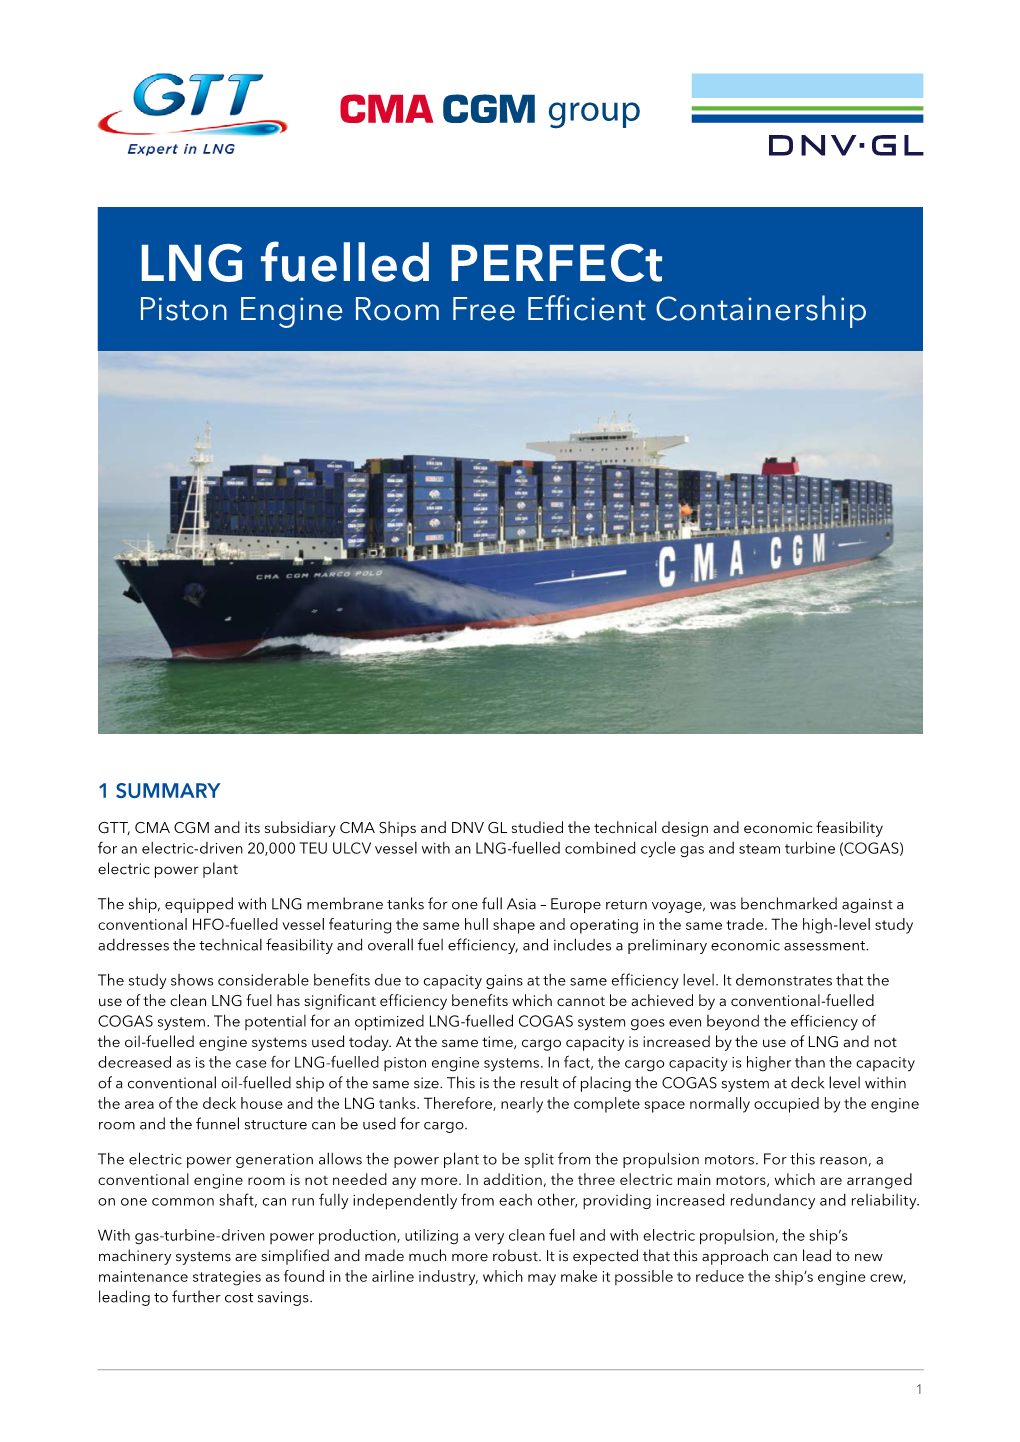 LNG Fuelled Perfect Piston Engine Room Free Efficient Containership